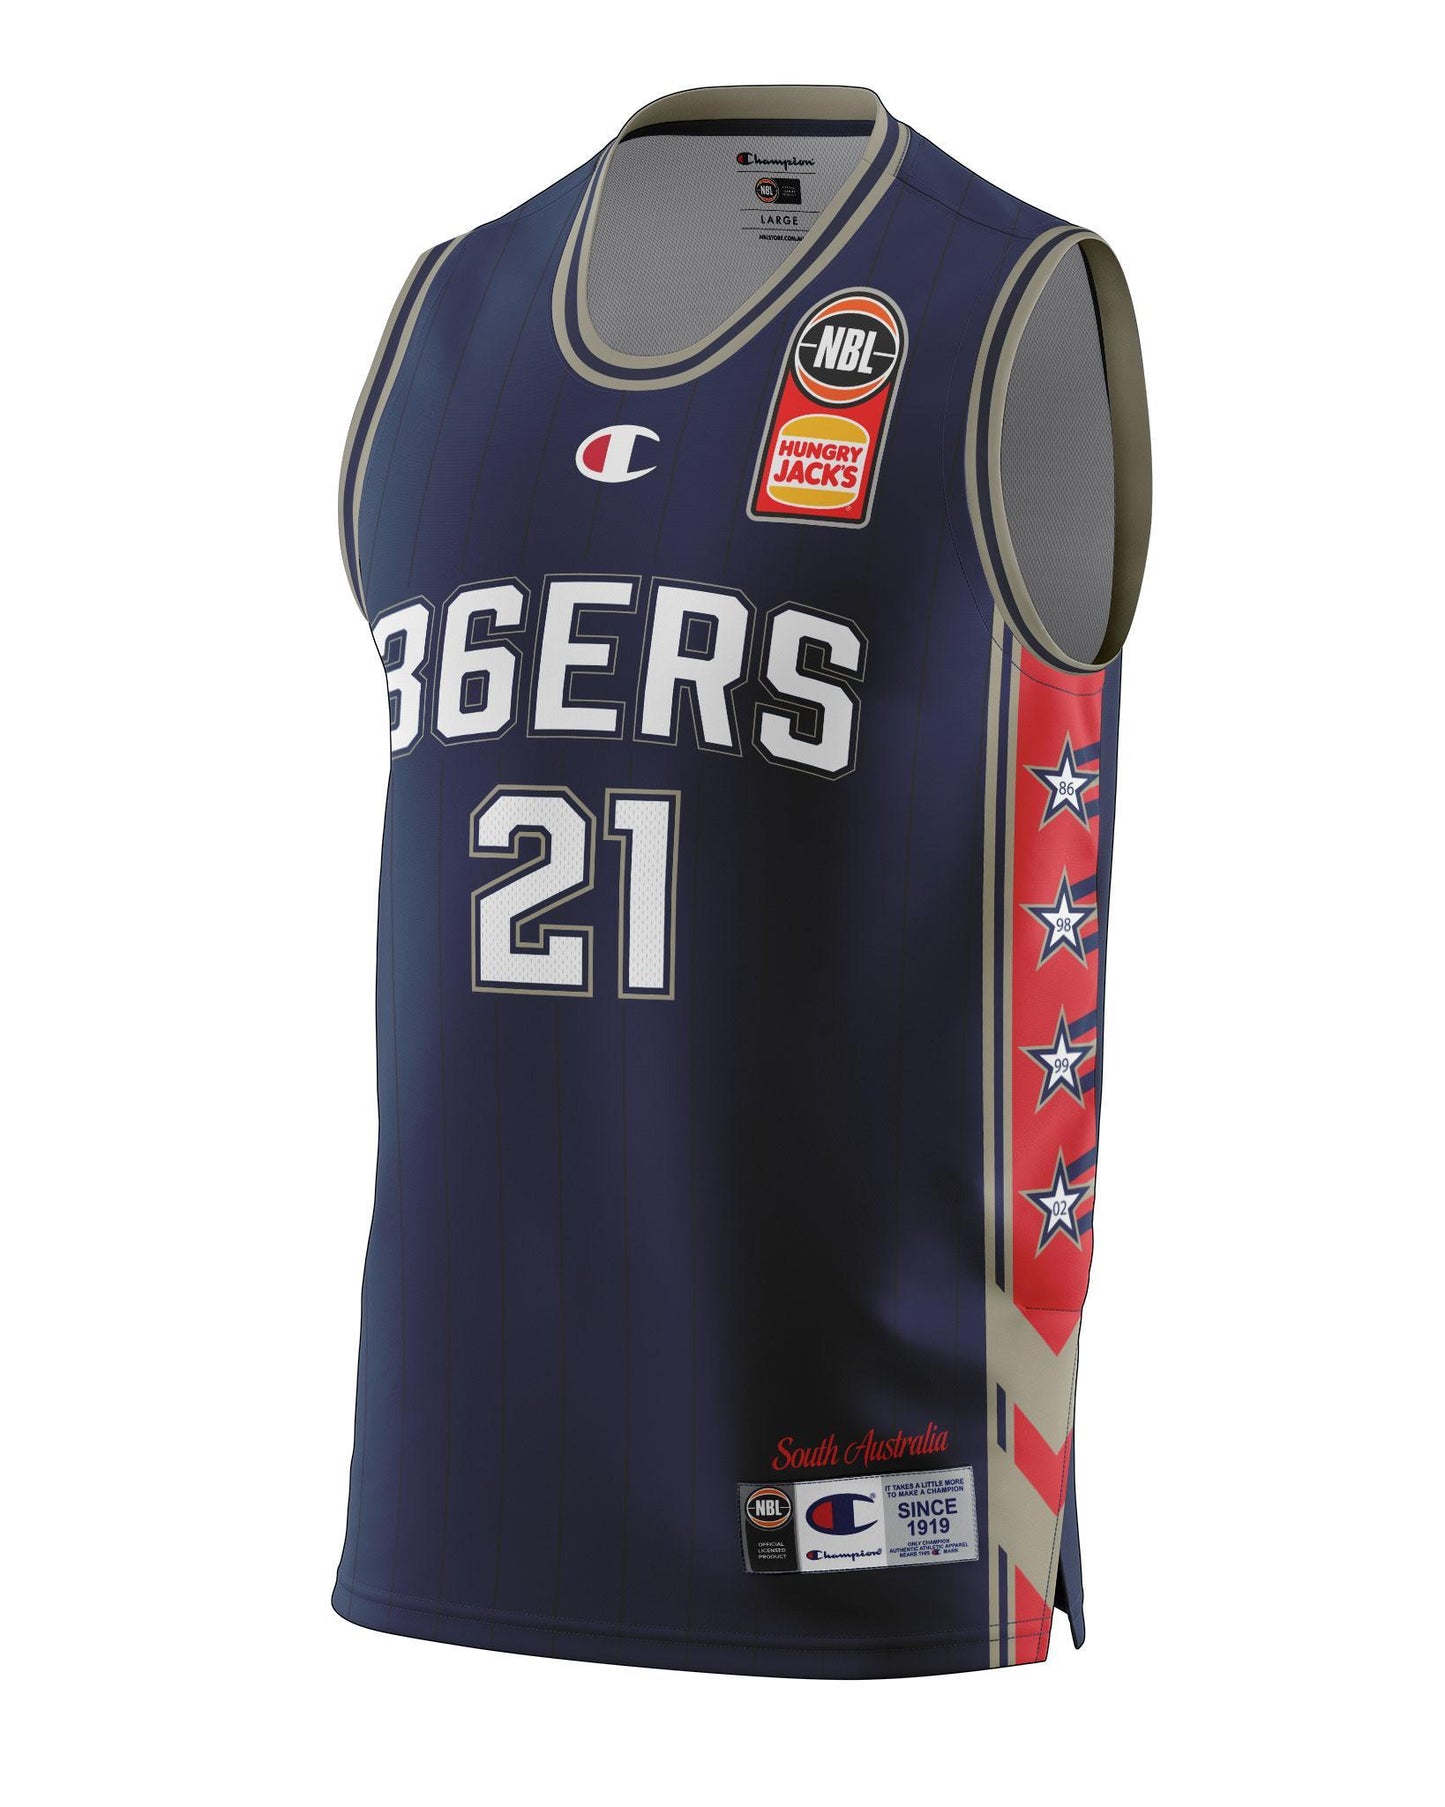 Adelaide 36ers 2021/22 Authentic Adult Home Jersey - Daniel Johnson